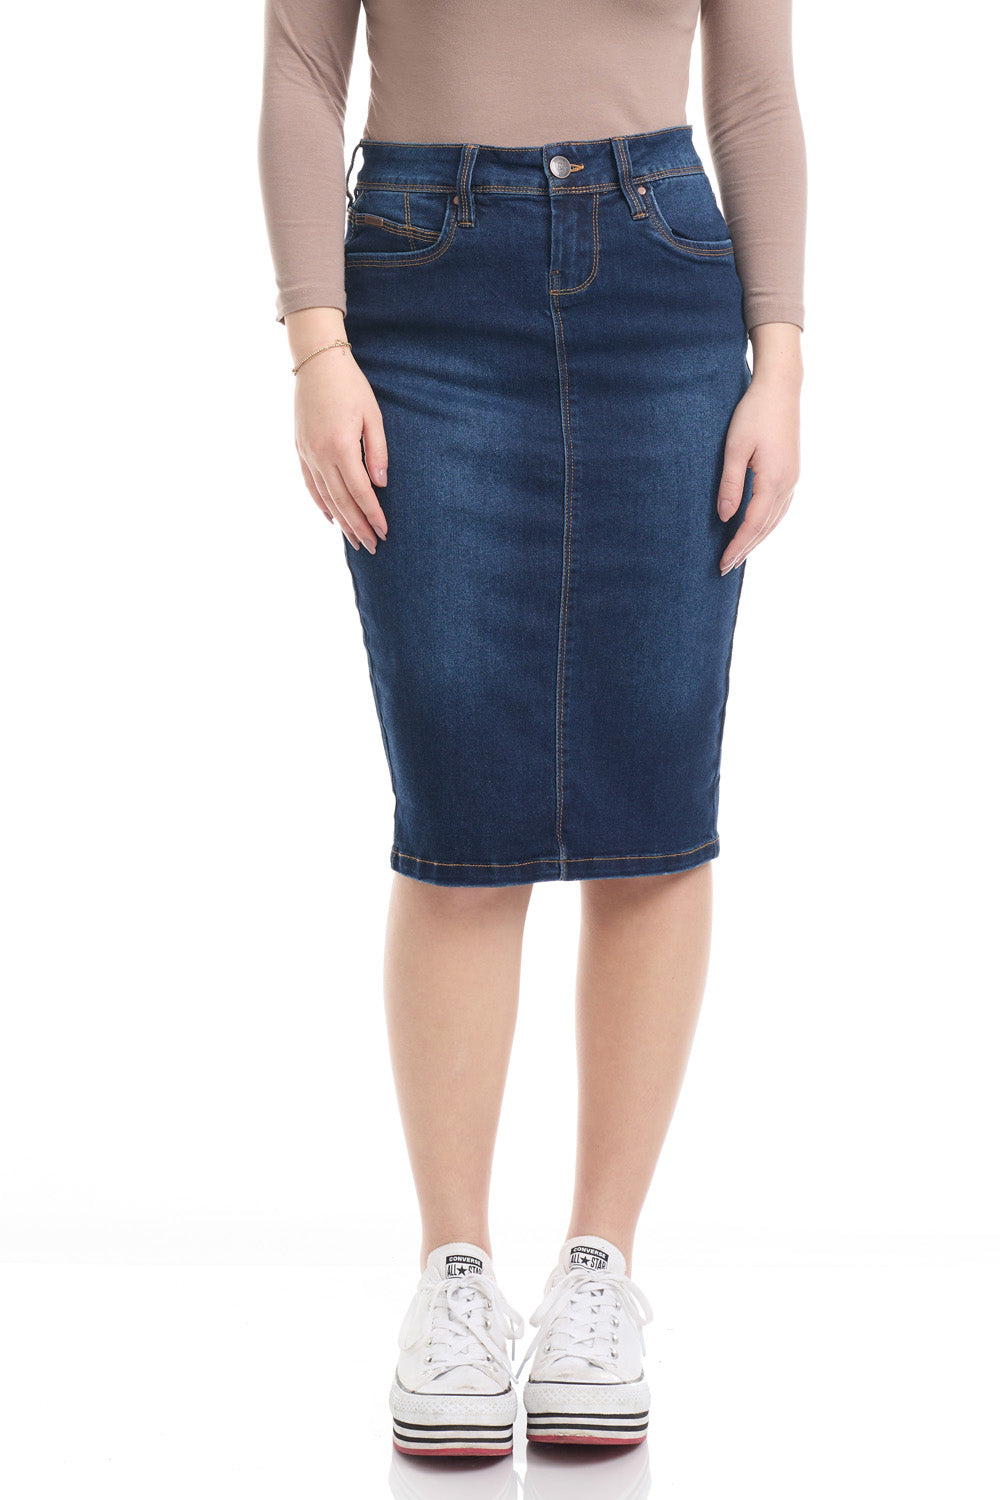 modest blue jean pencil skirt with button and zipper closure